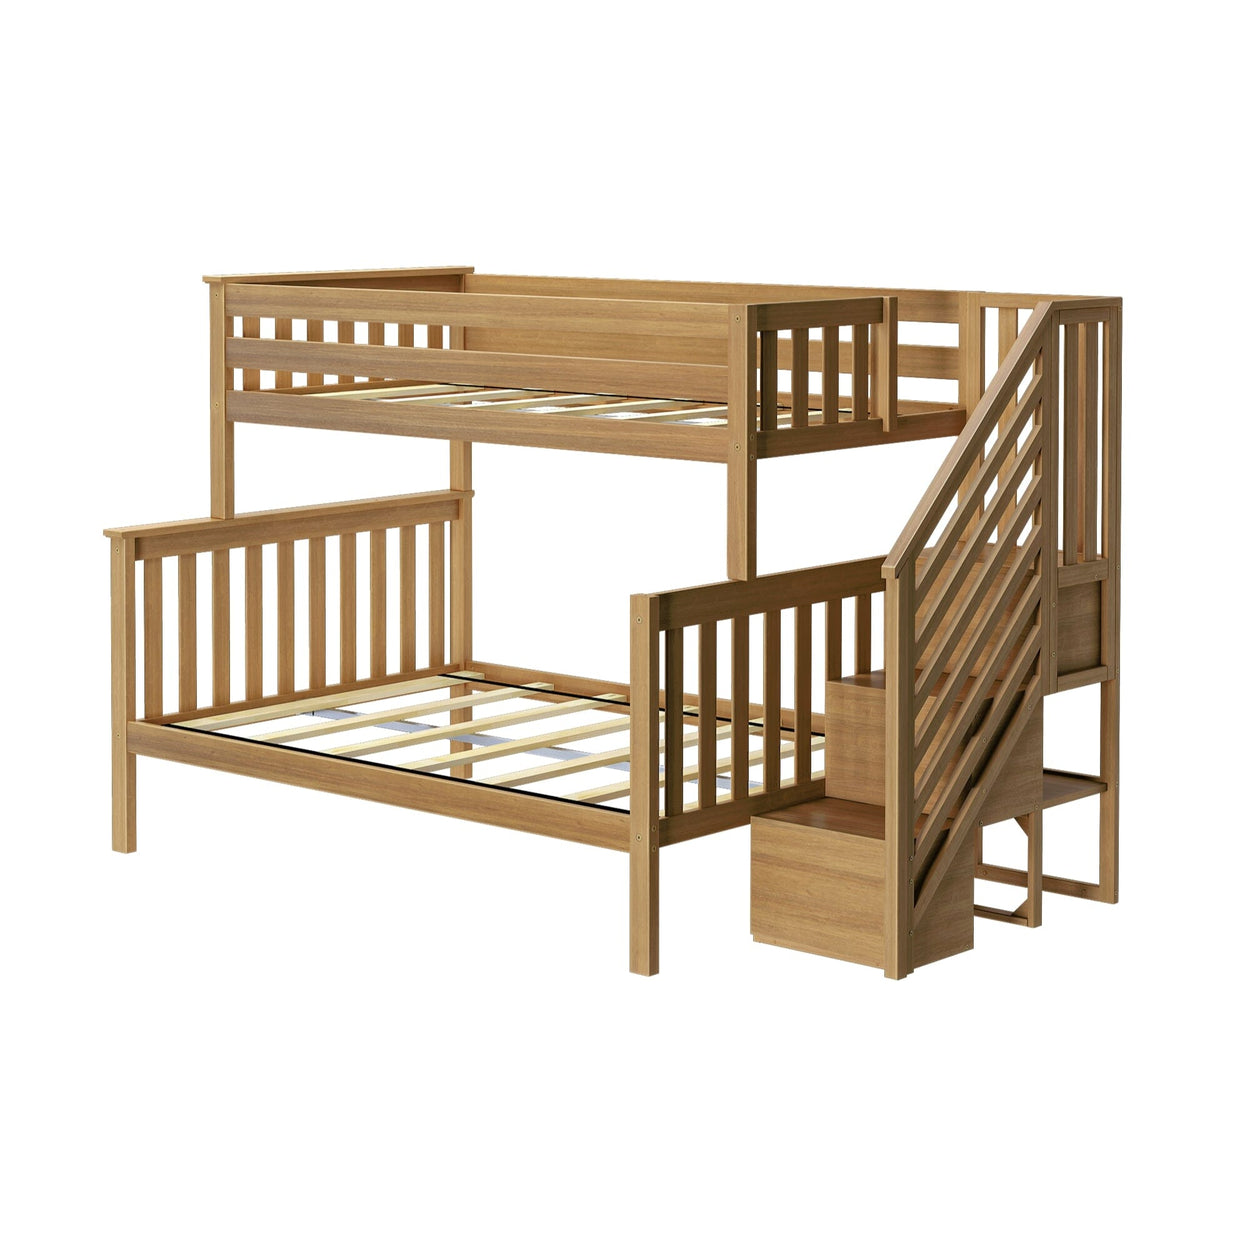 185235-007 : Bunk Beds Twin/Full Bunk for Staircase, Pecan  (180235 + 180250)